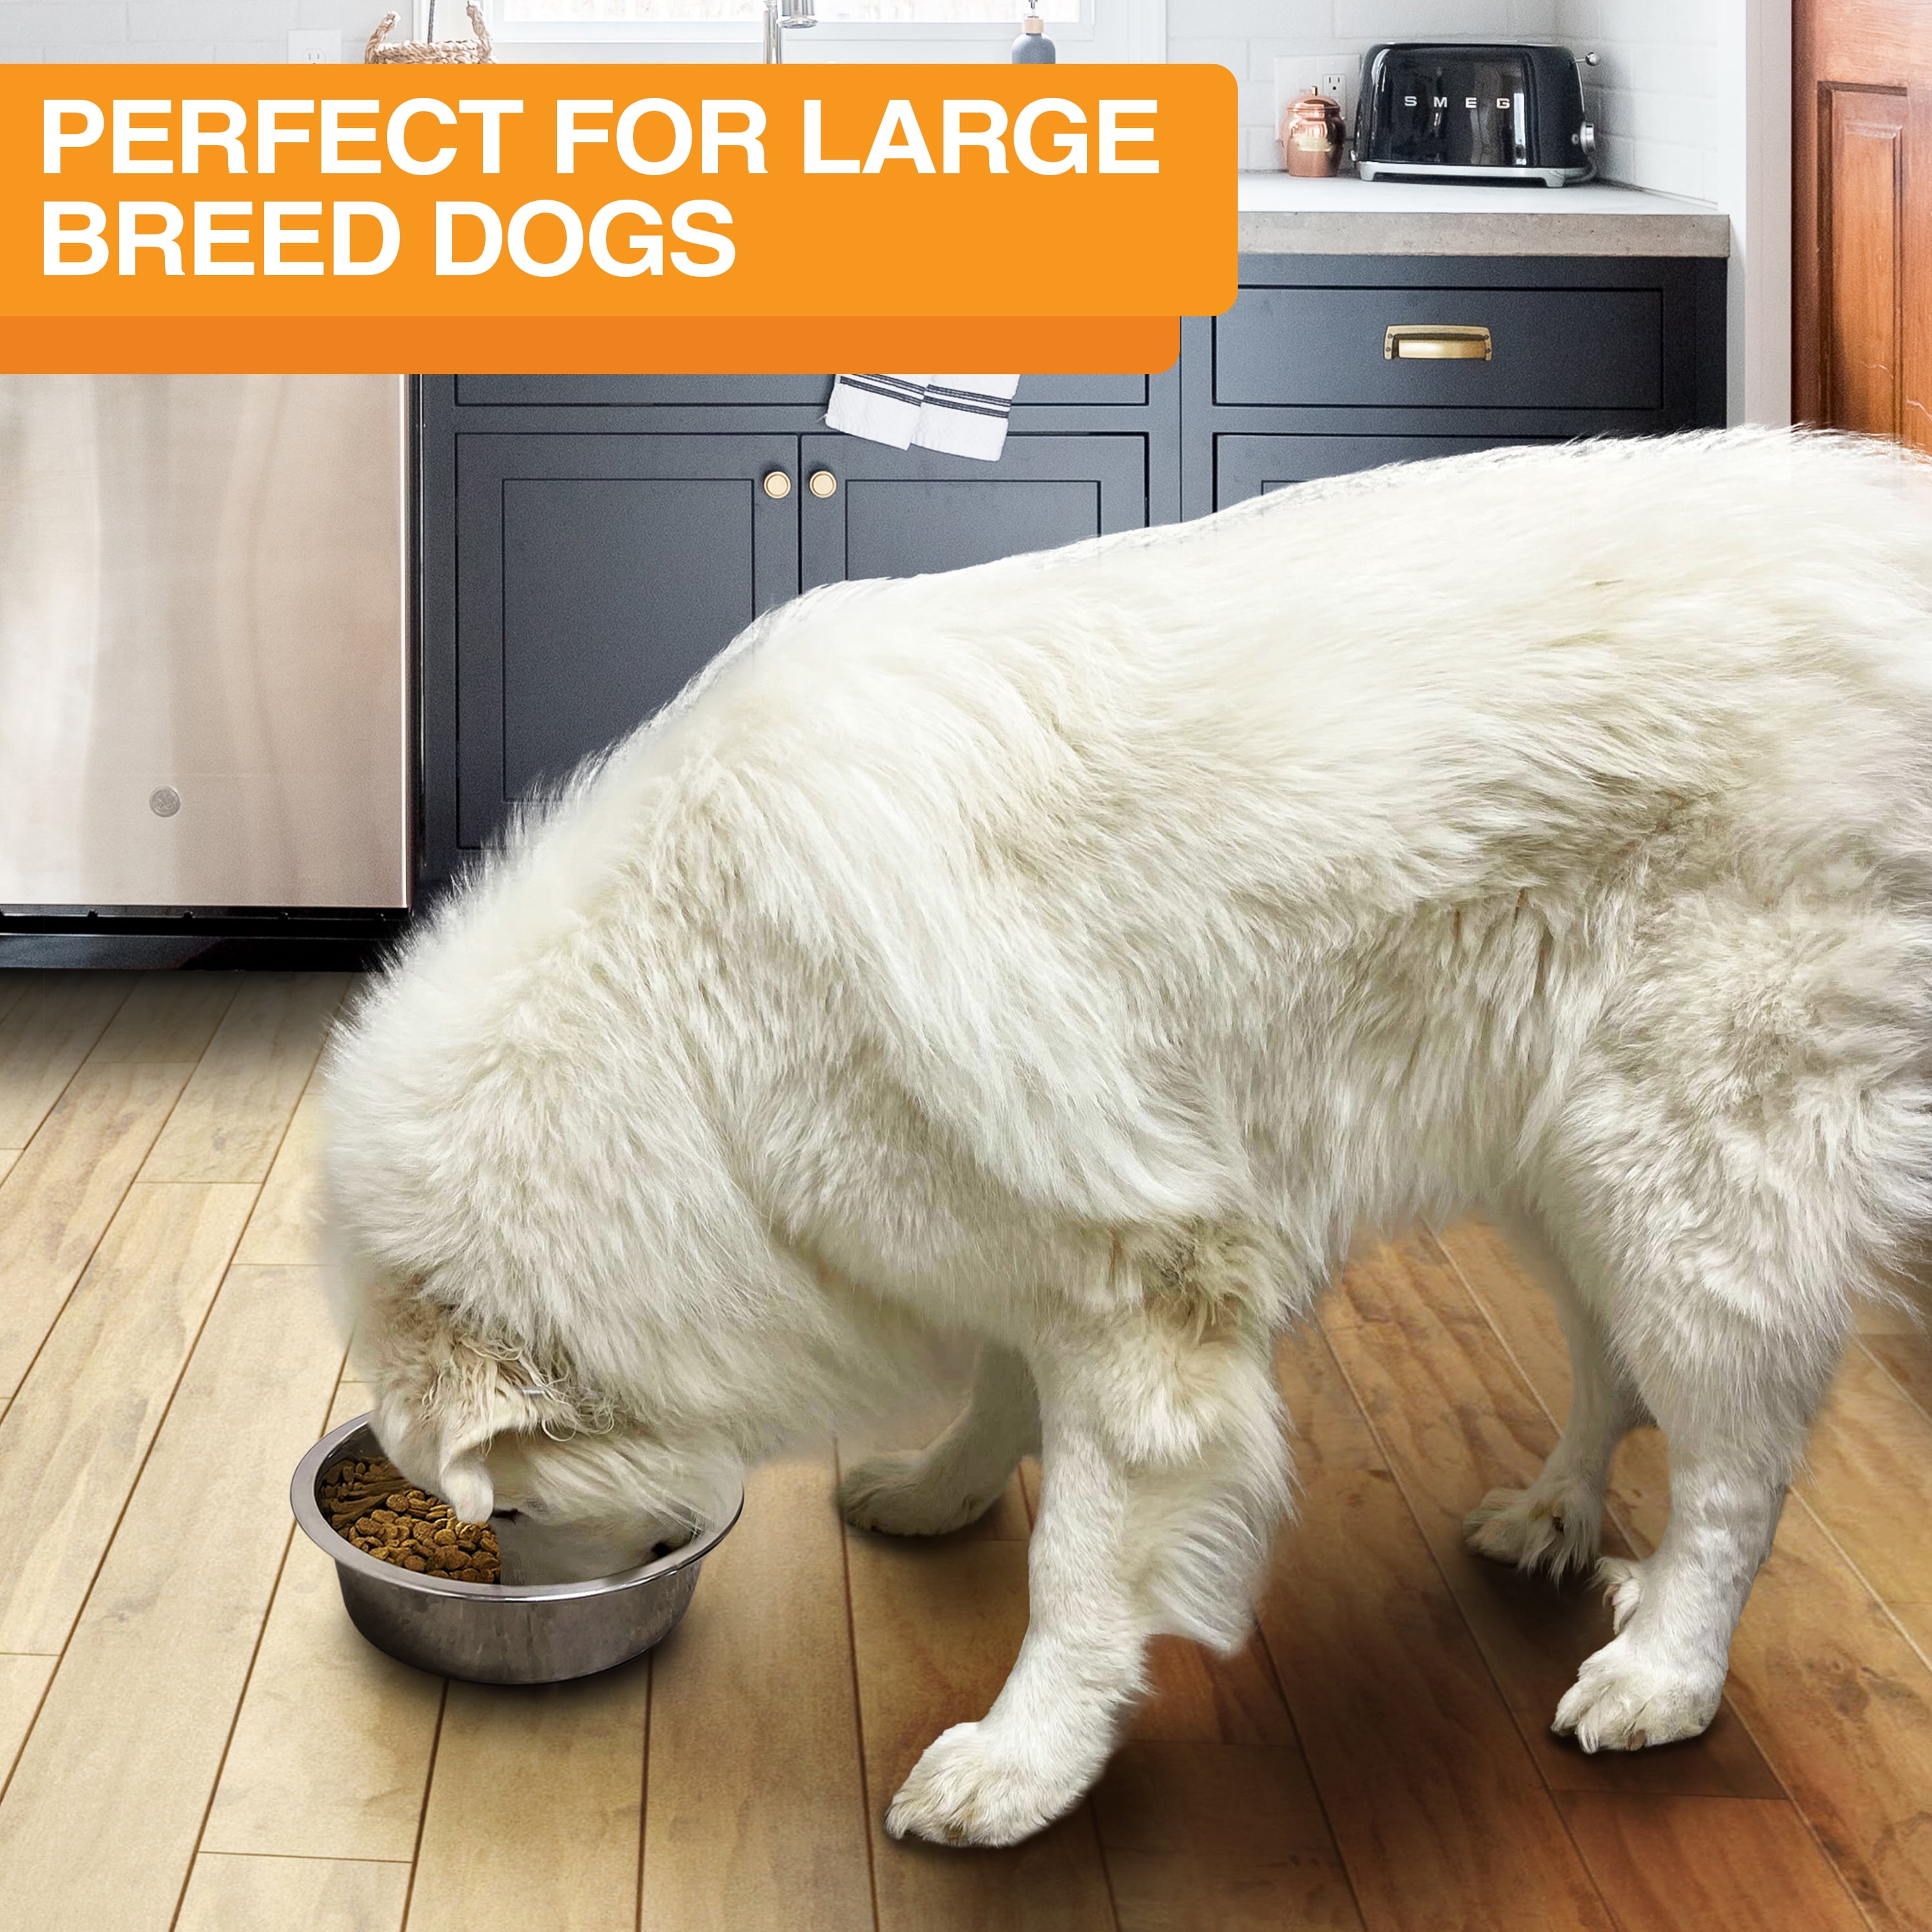 Neater Pet Brands Big Bowl - Extra Large Water Bowl for Dogs (1.25 Gallon  Capacity) - Huge Over Size Pet Bowl - Champagne